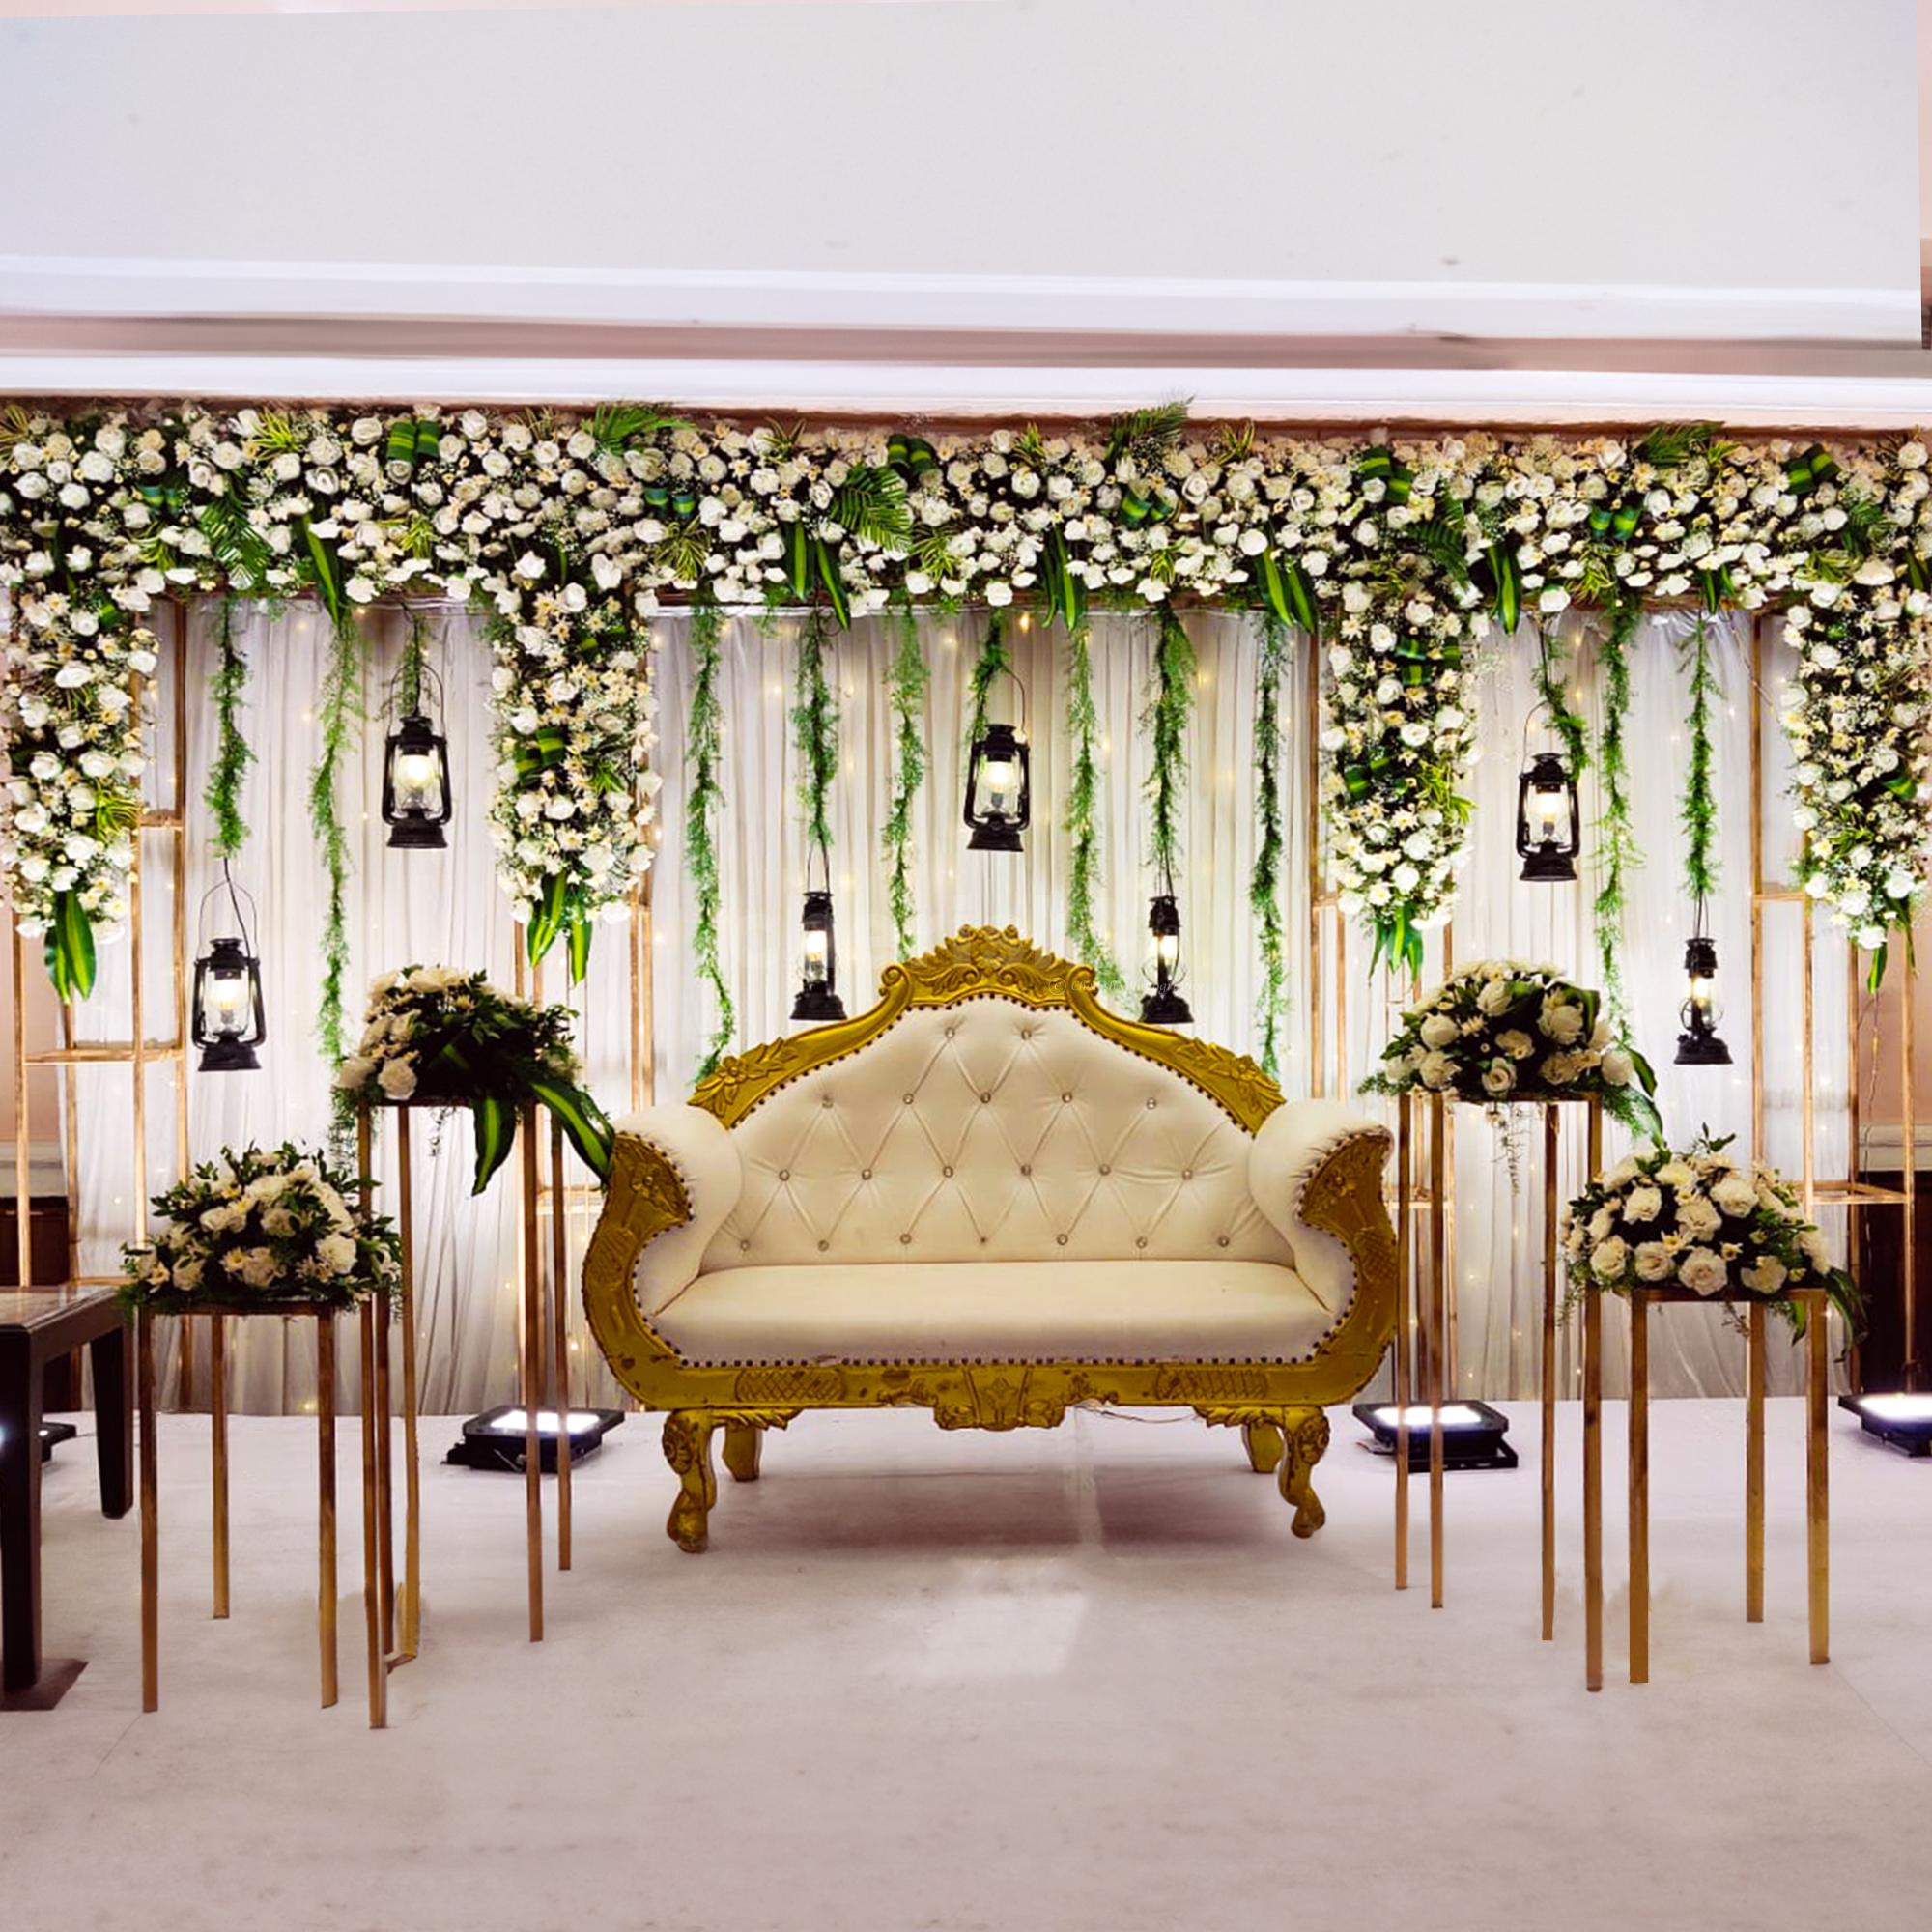 Floral decor trends of 2021: Fresh ways to use florals in Indian weddings